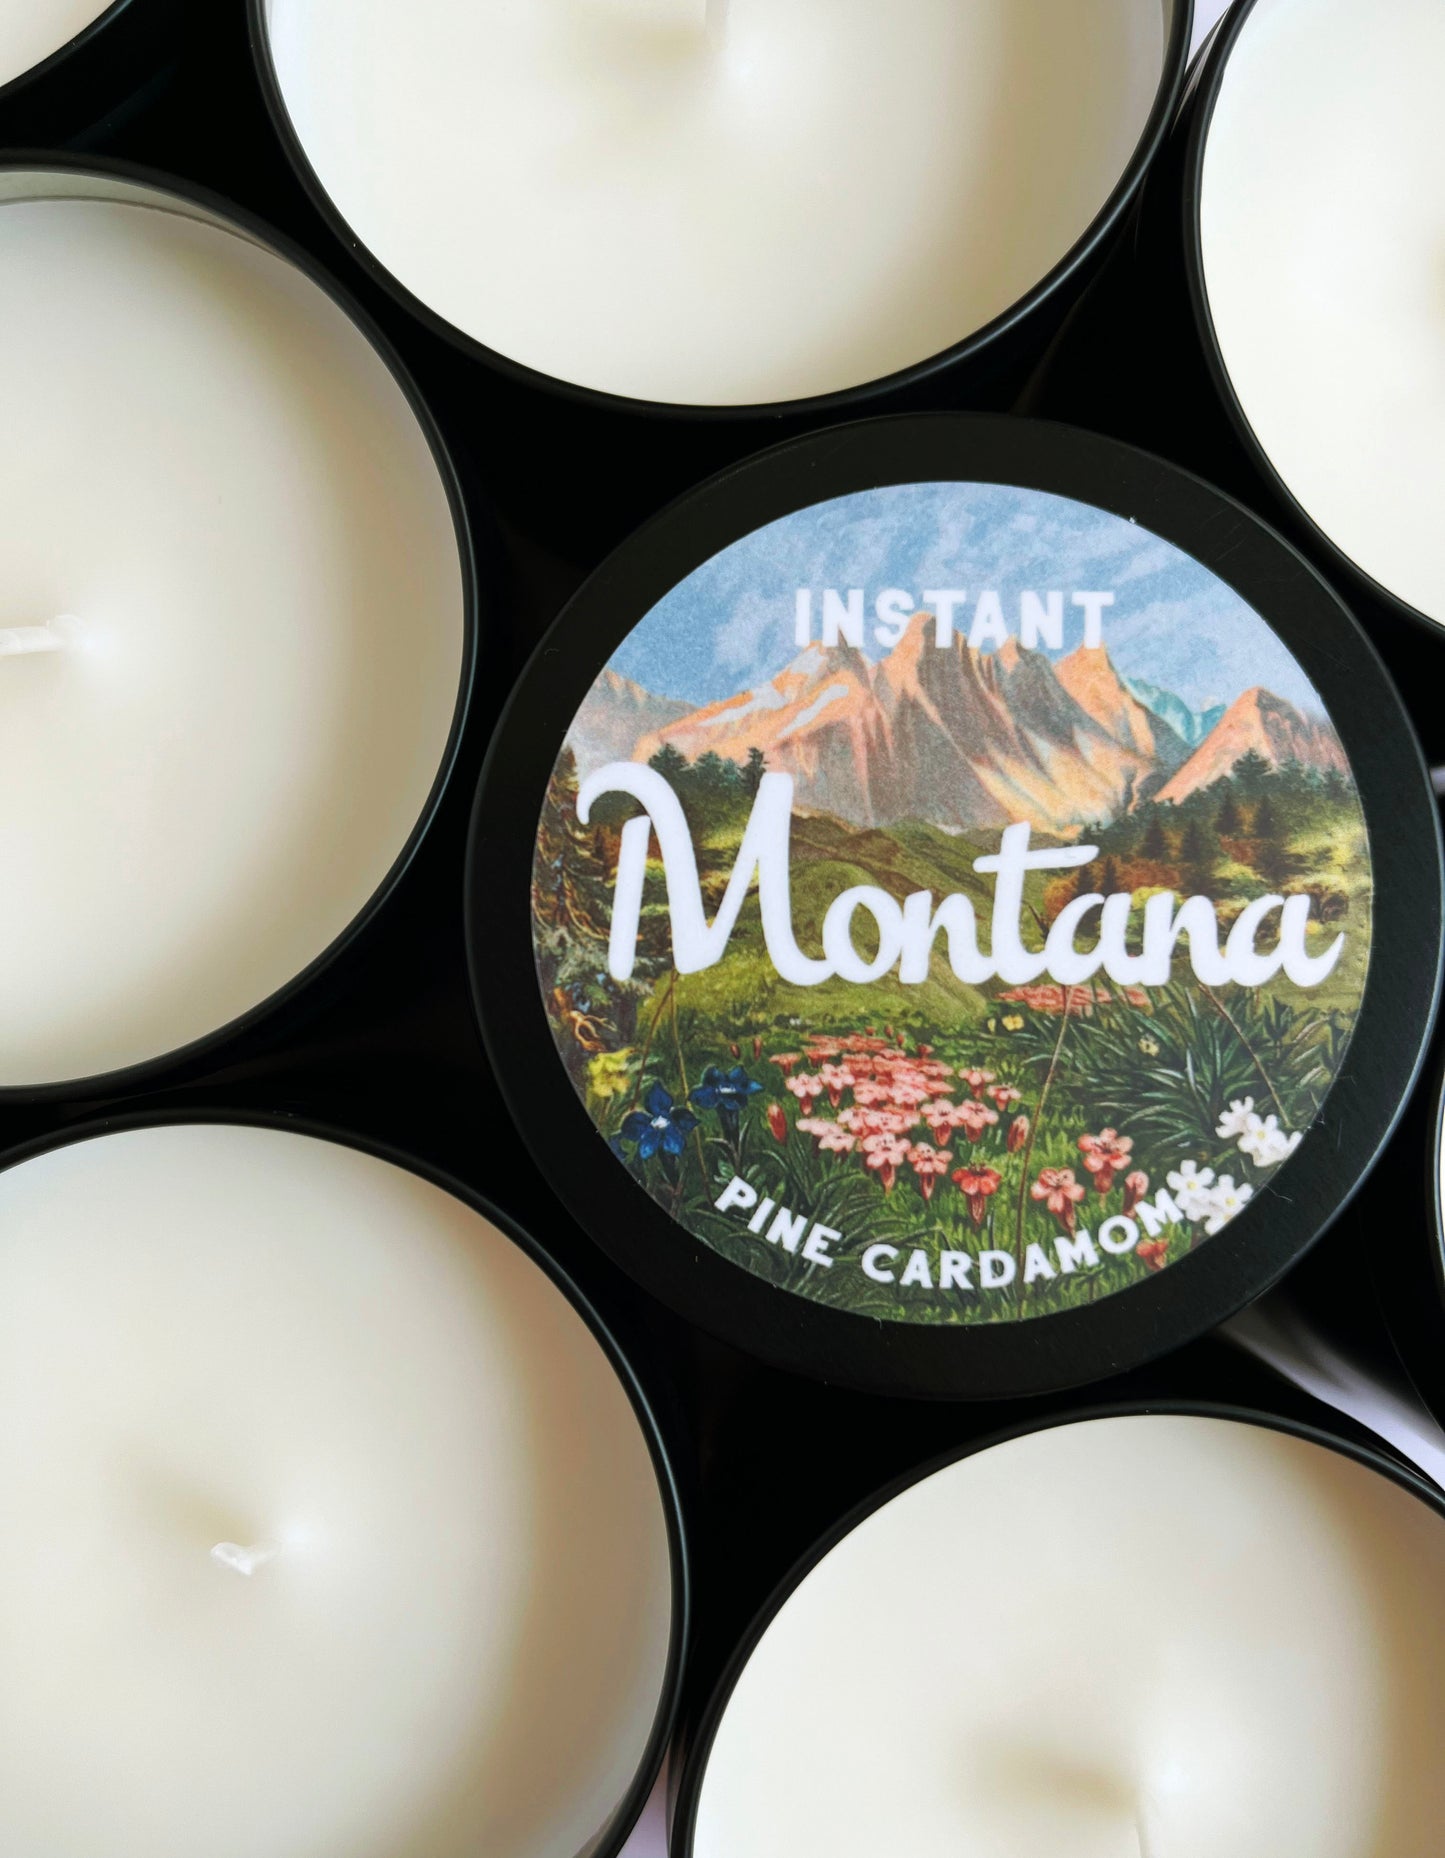 pine earthy candle woodsy fall scent winter mountains fresh travel tin candle black souvenir instant montana yellowstone coin laundry